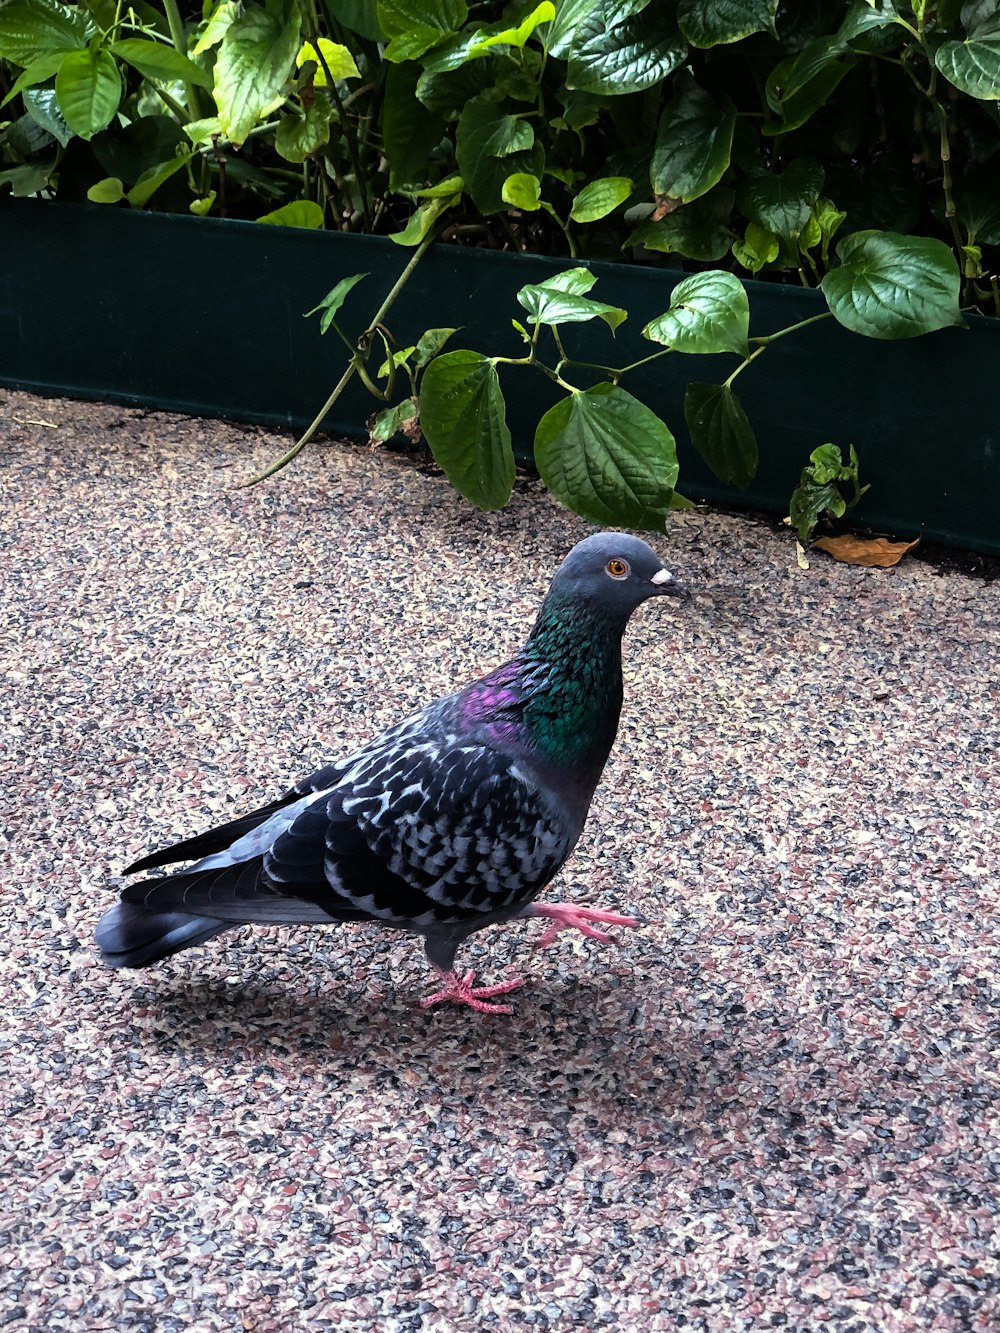 a pigeon is standing on the ground next to a potted plant